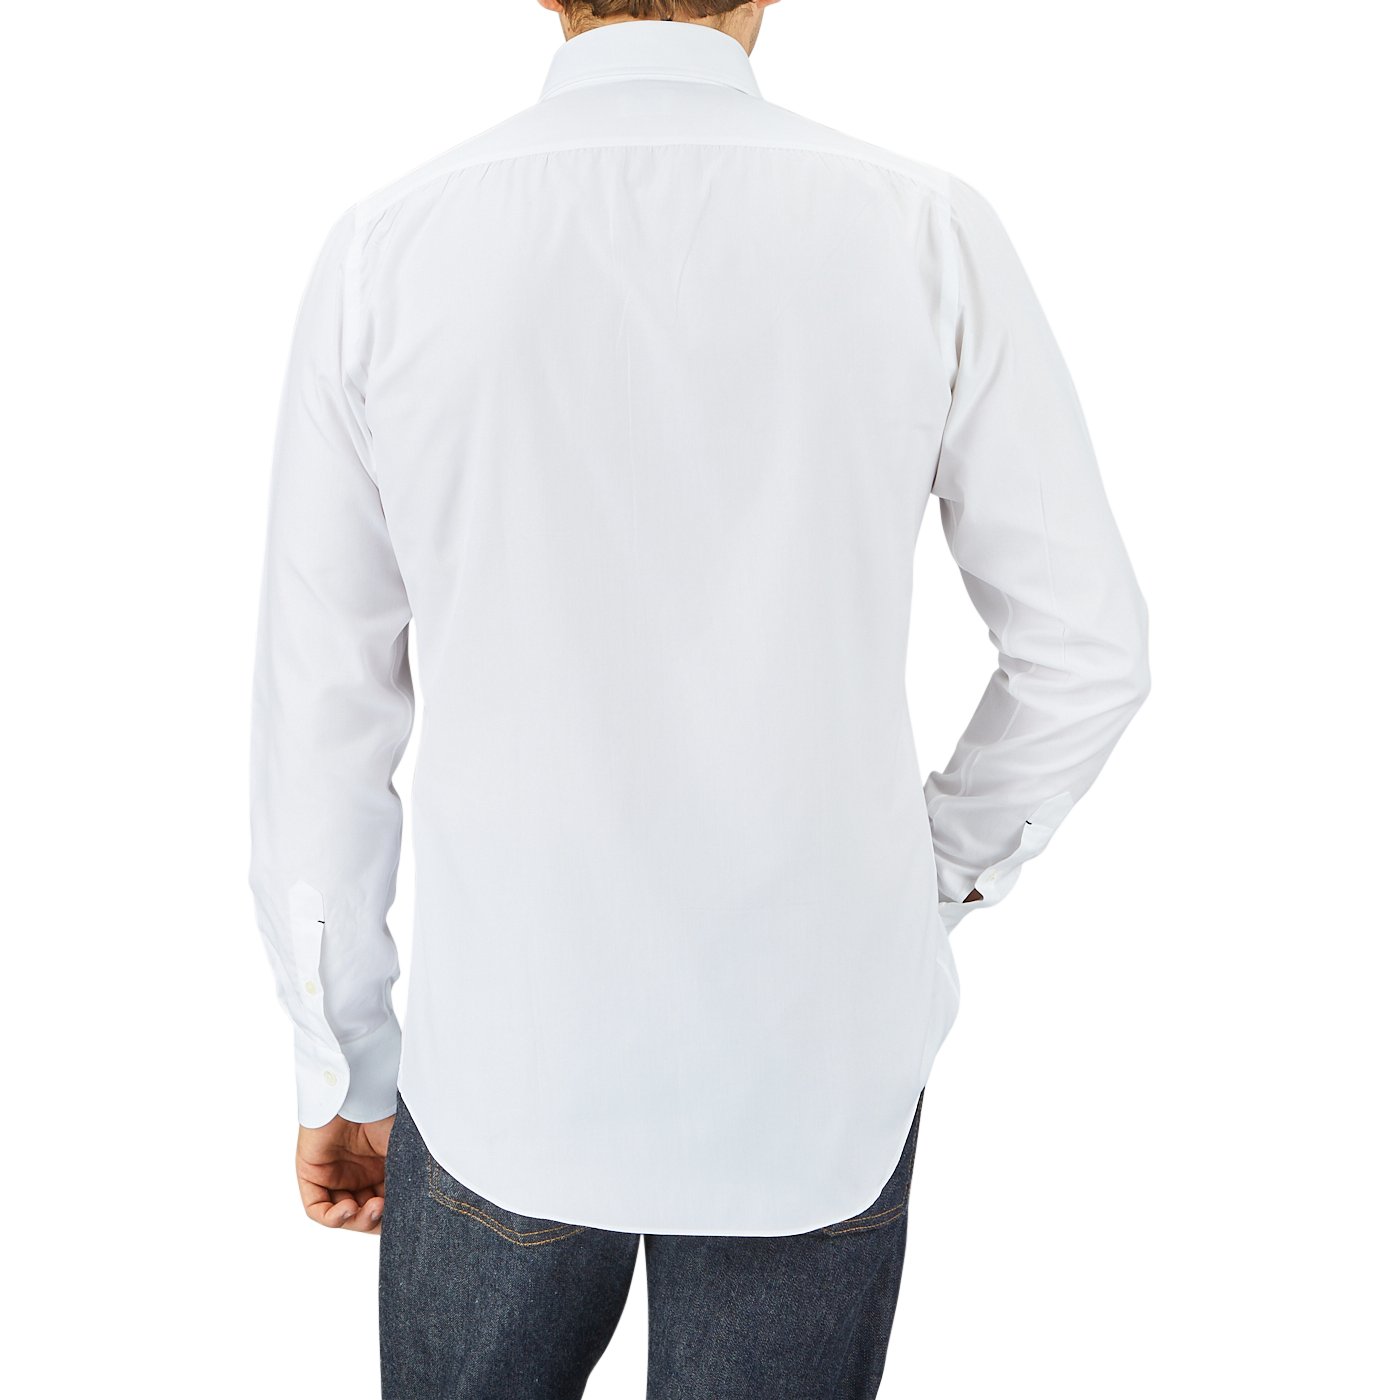 Man in a Mazzarelli White Royal Oxford BD Slim Shirt and blue jeans, viewed from behind.